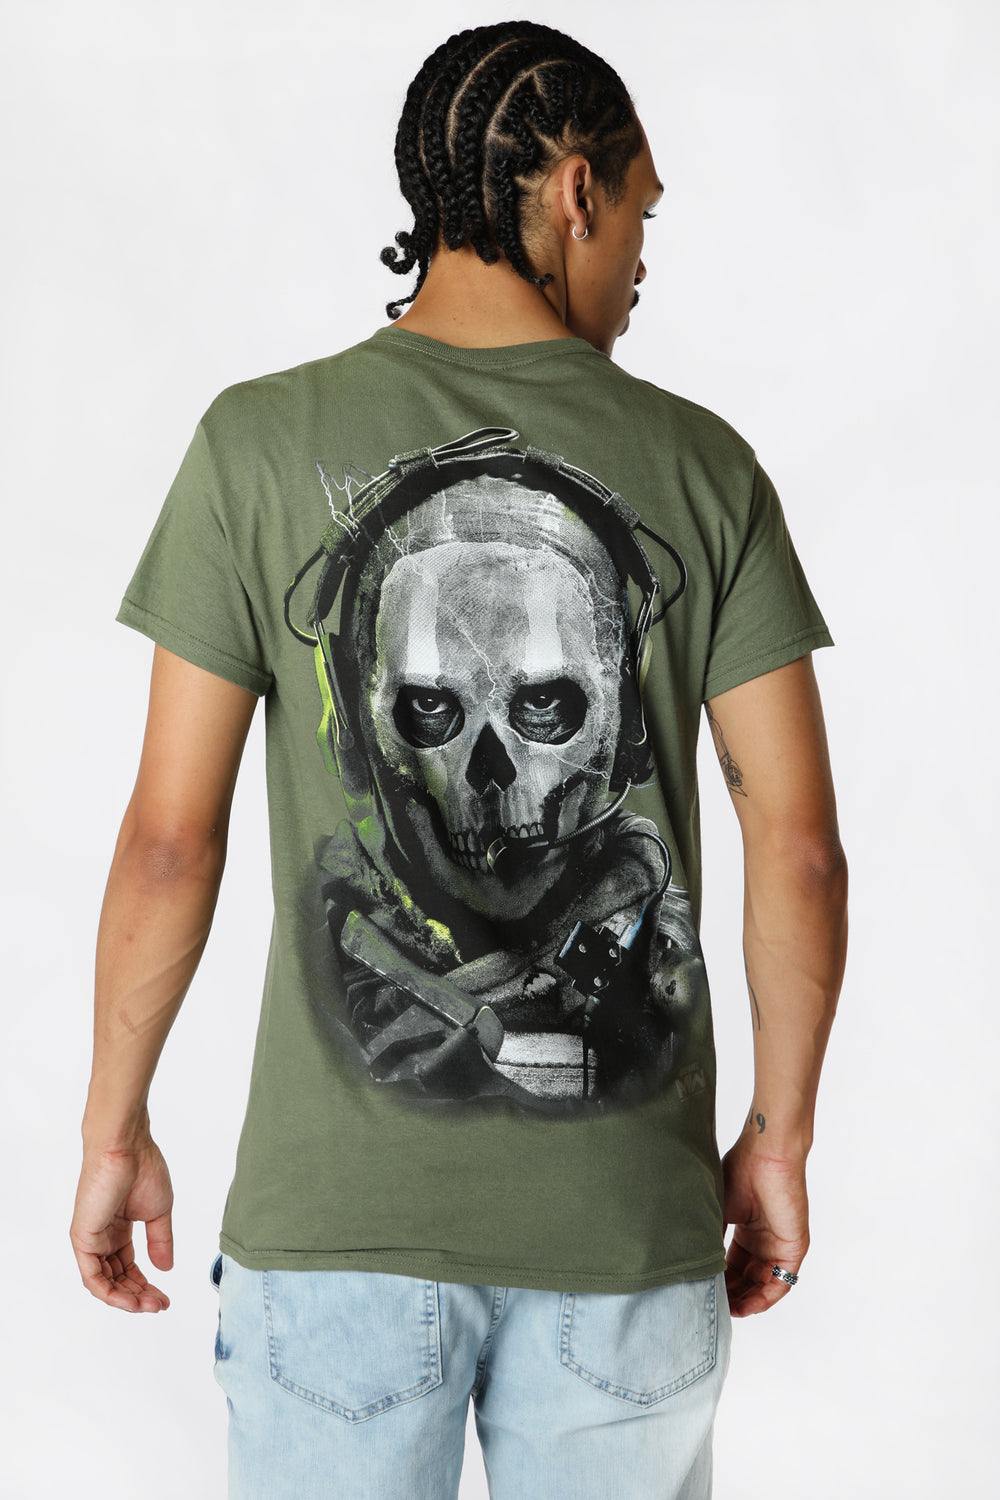 Primitive x Call Of Duty Ghost T-Shirt Primitive x Call Of Duty Ghost T-Shirt